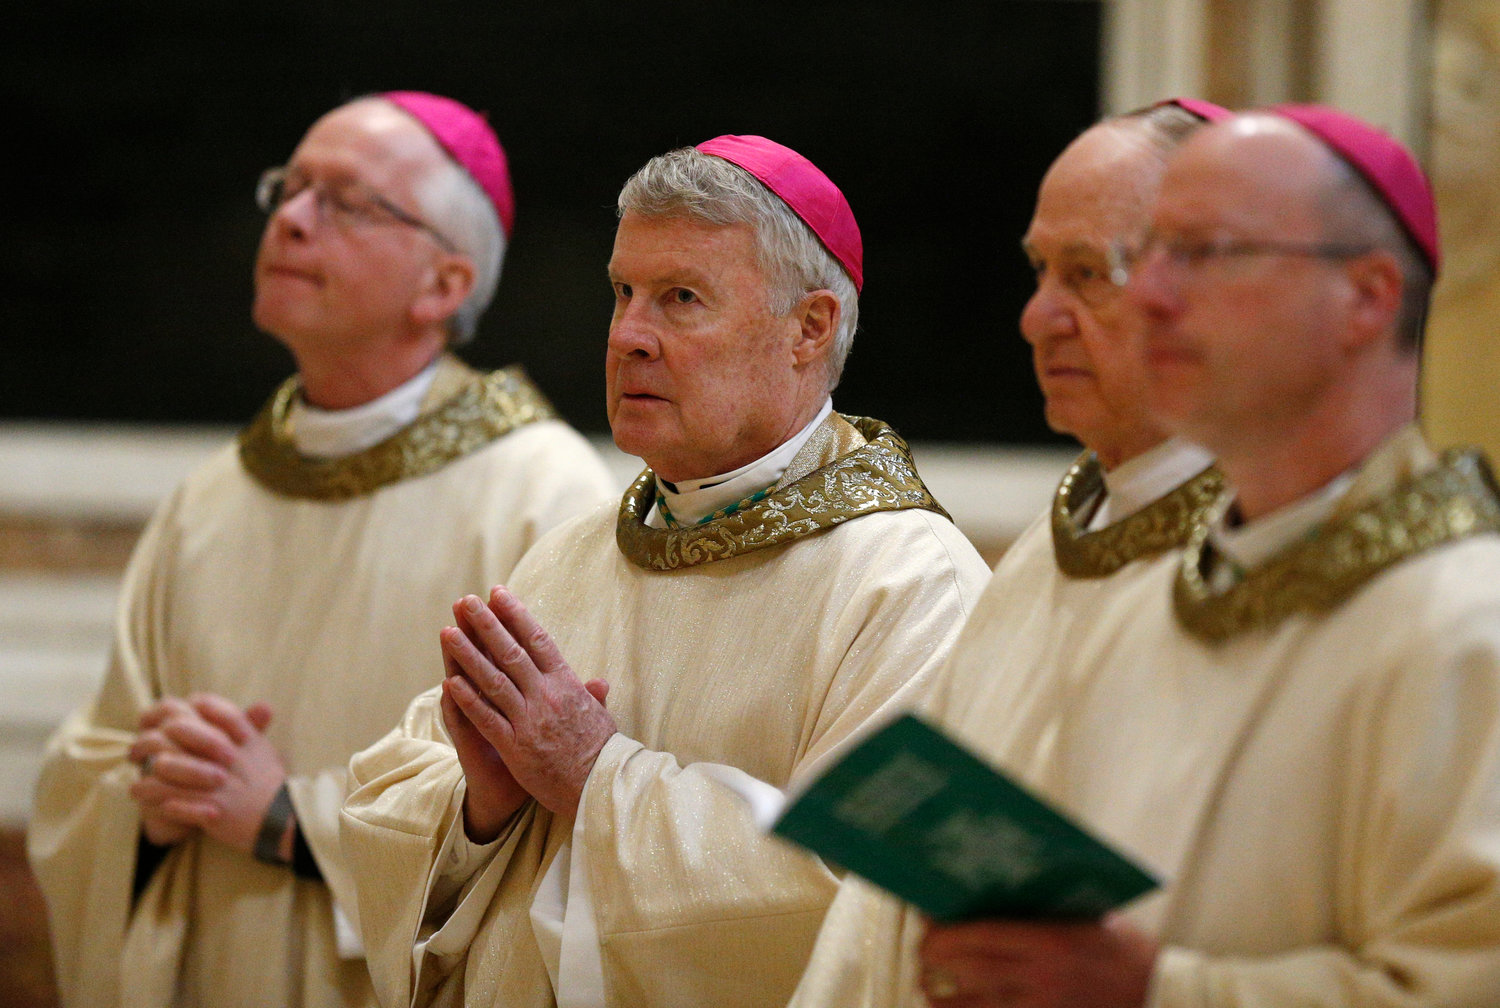 Bishop W. Shawn McKnight of Jefferson City and other U.S. bishops from Iowa, Kansas, Missouri and Nebraska concelebrate Mass at the Basilica of St. Mary Major in Rome Jan. 14, 2020. The bishops were making their "ad limina" visits to the Vatican to report on the status of their dioceses to the pope and Vatican officials.